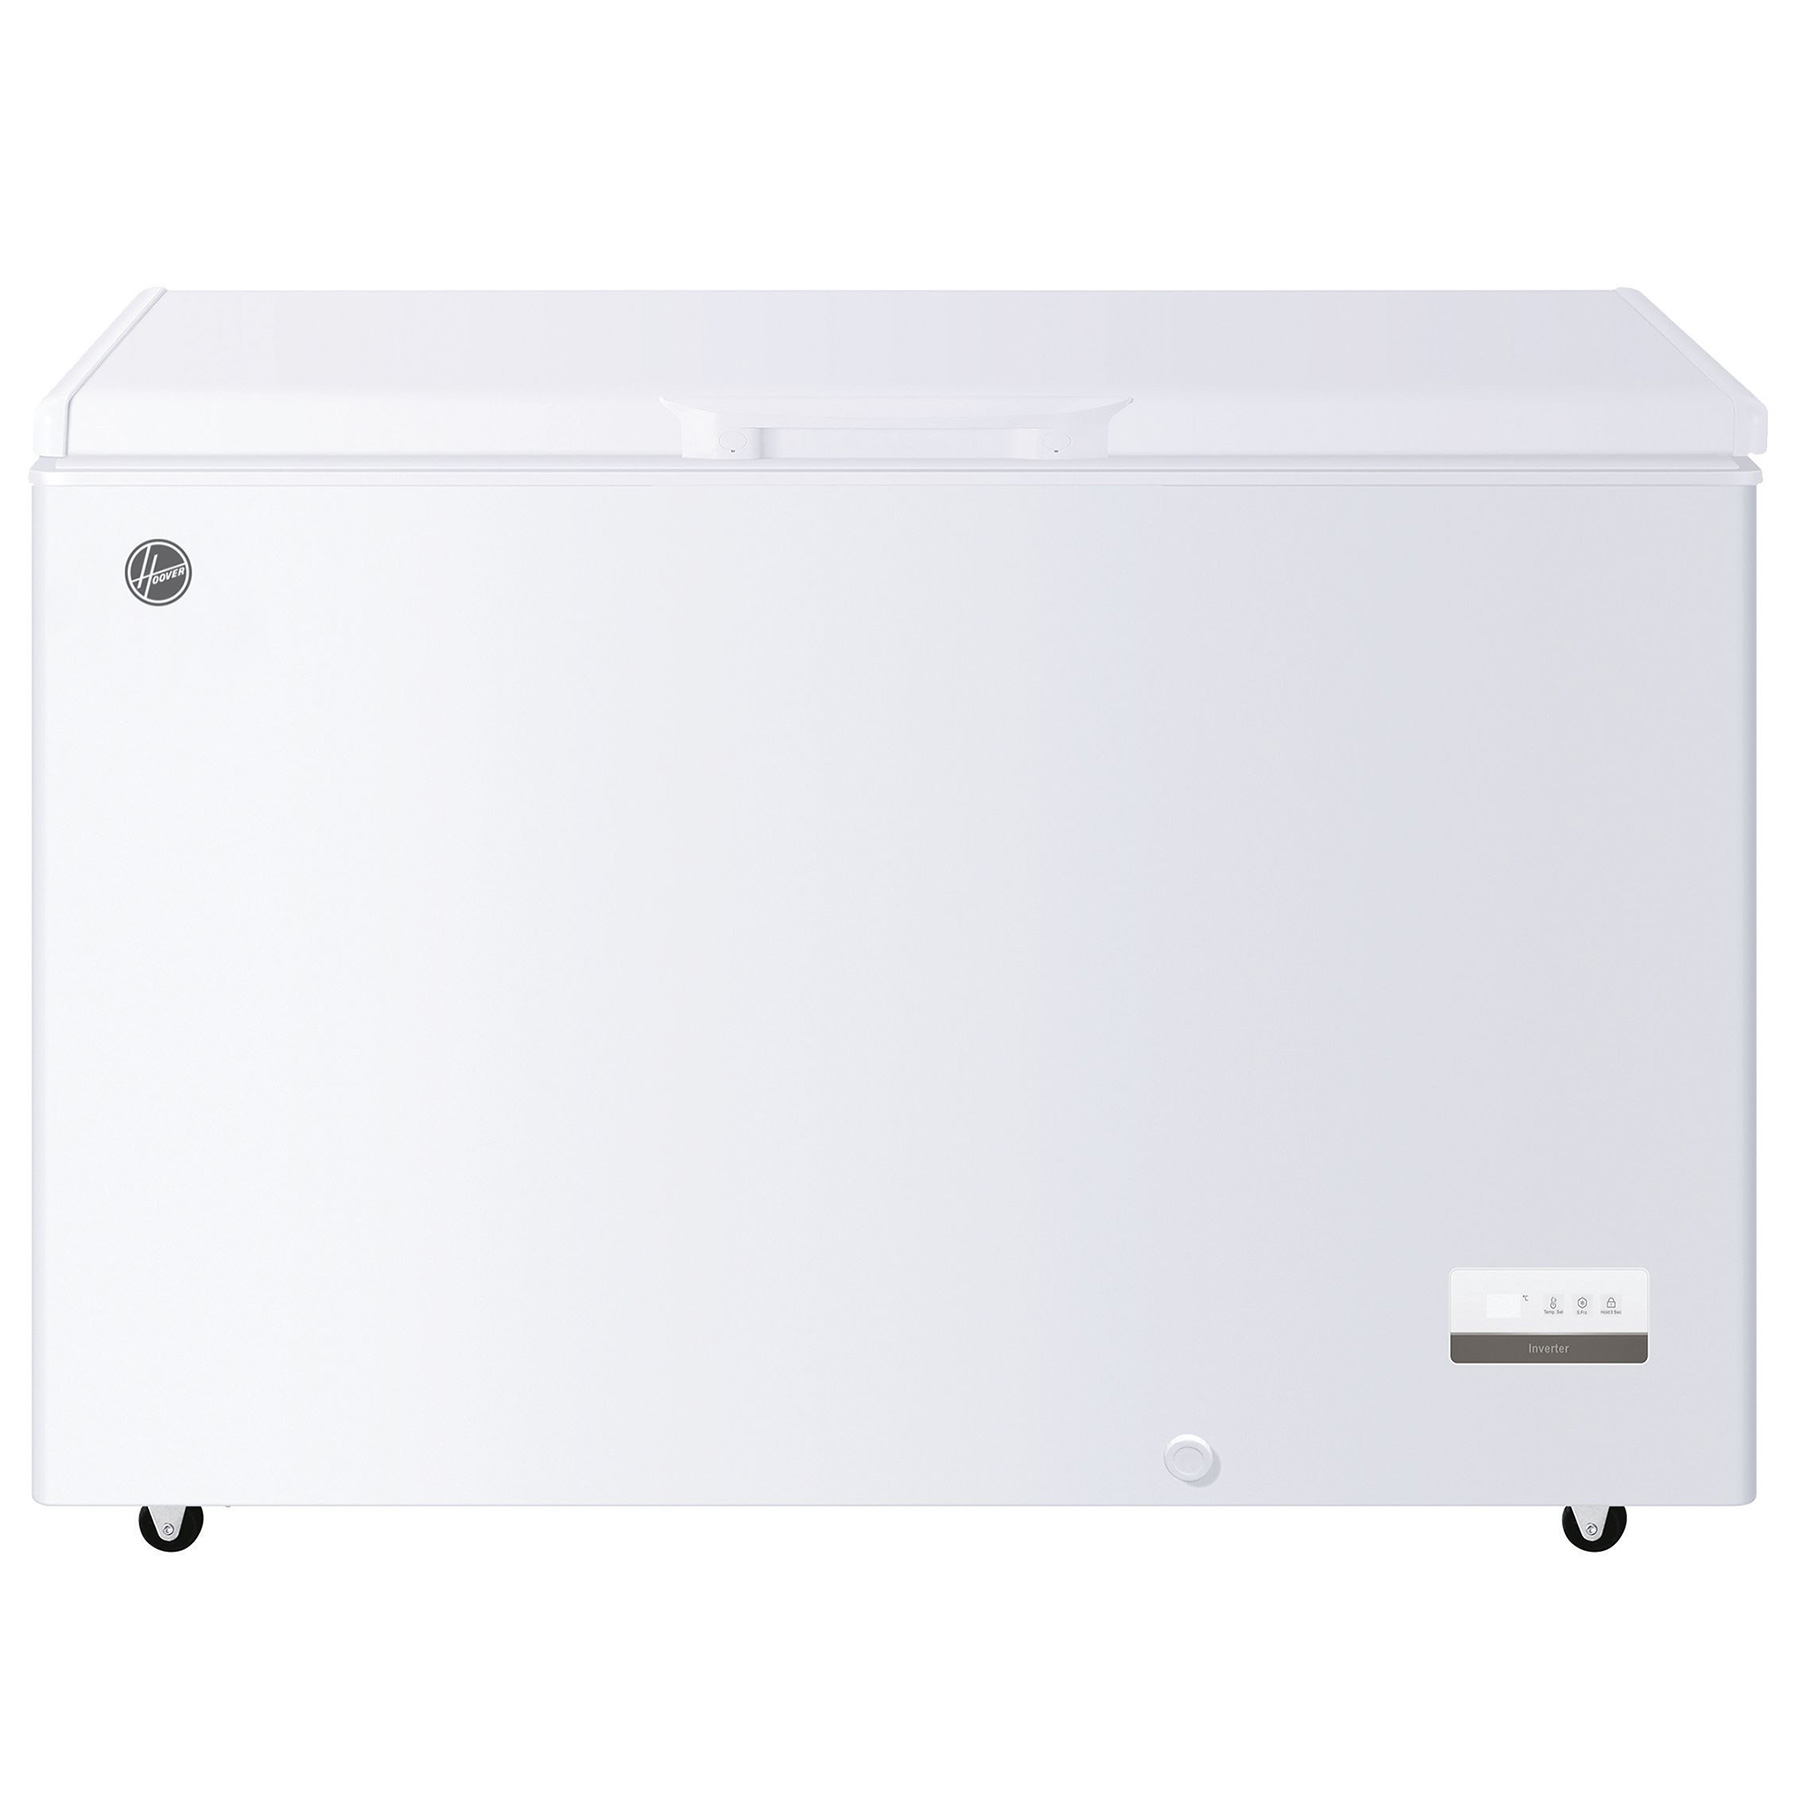 Image of Hoover HHCH312EL 110cm Chest Freezer in White 310 Litre 0 84m F Rated